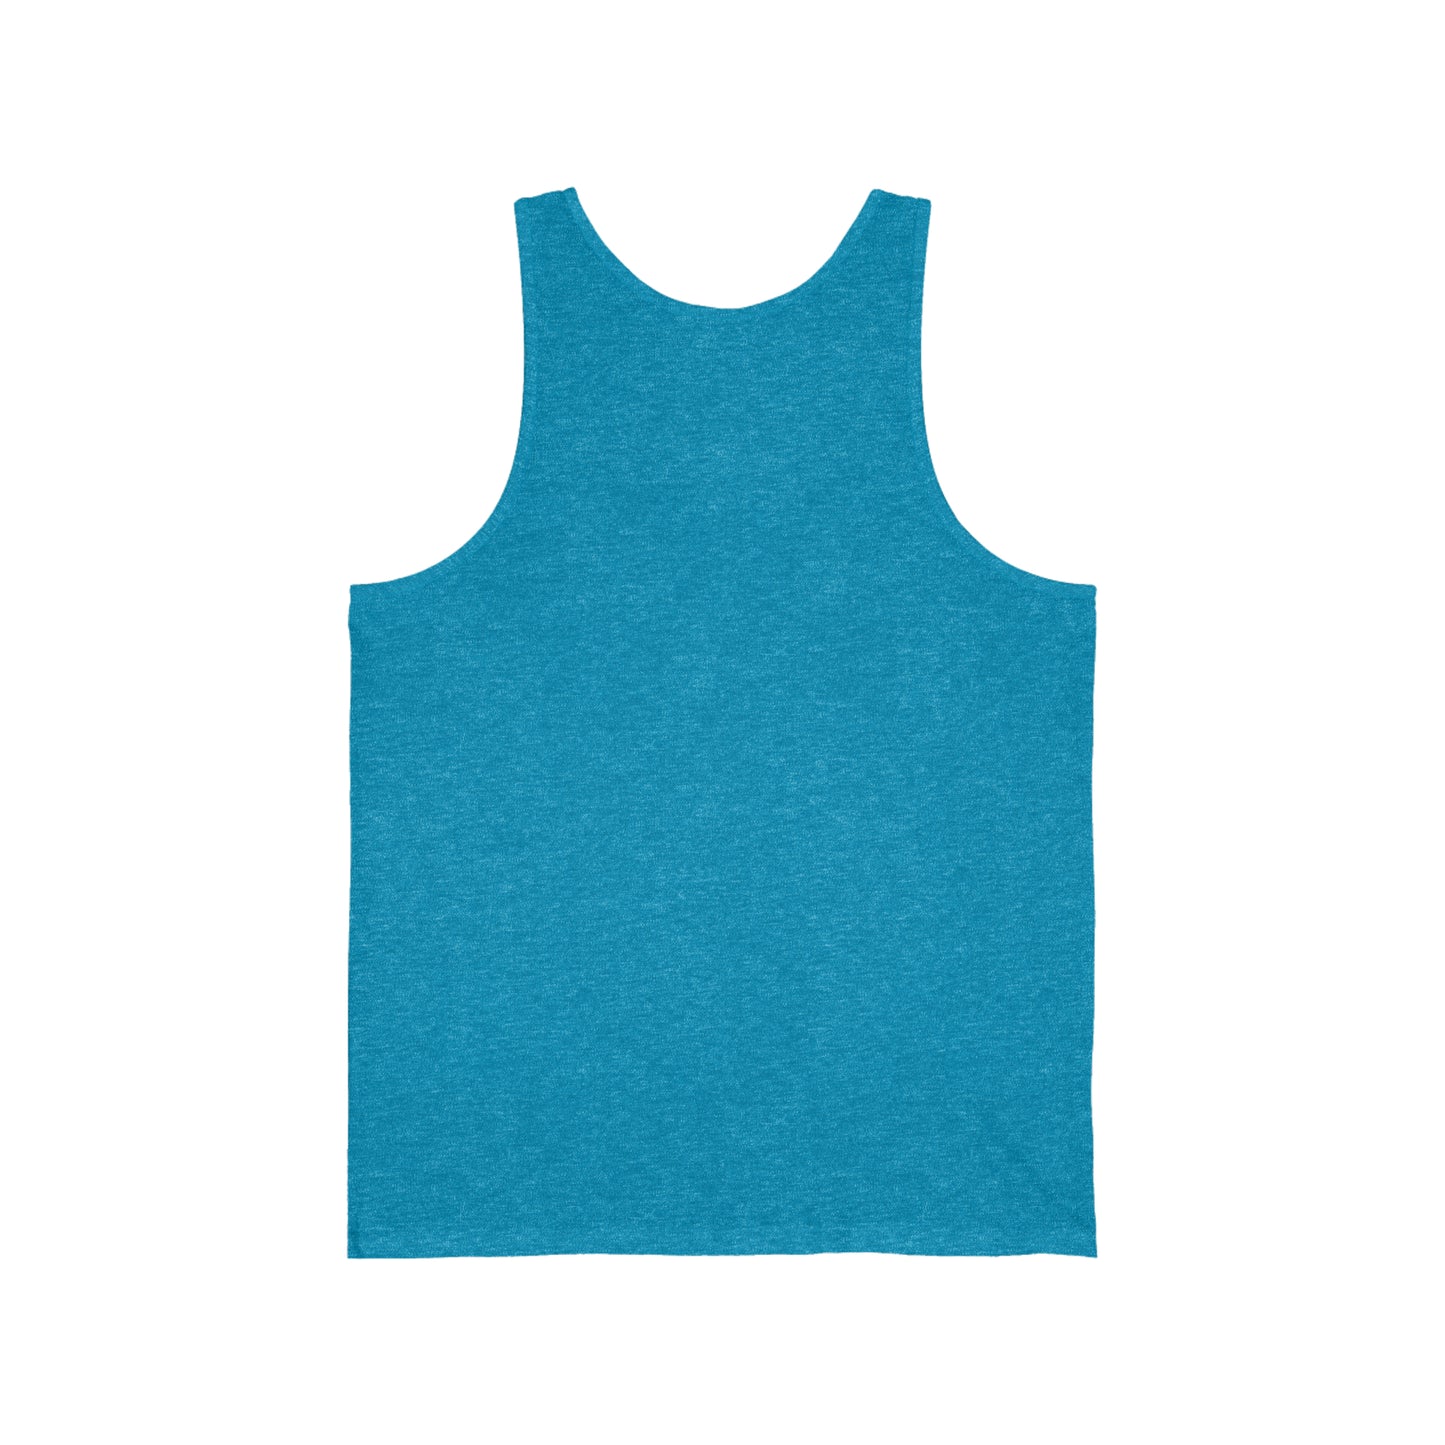 Taylor Swift 1989 Limited Edition Unisex Jersey Tank